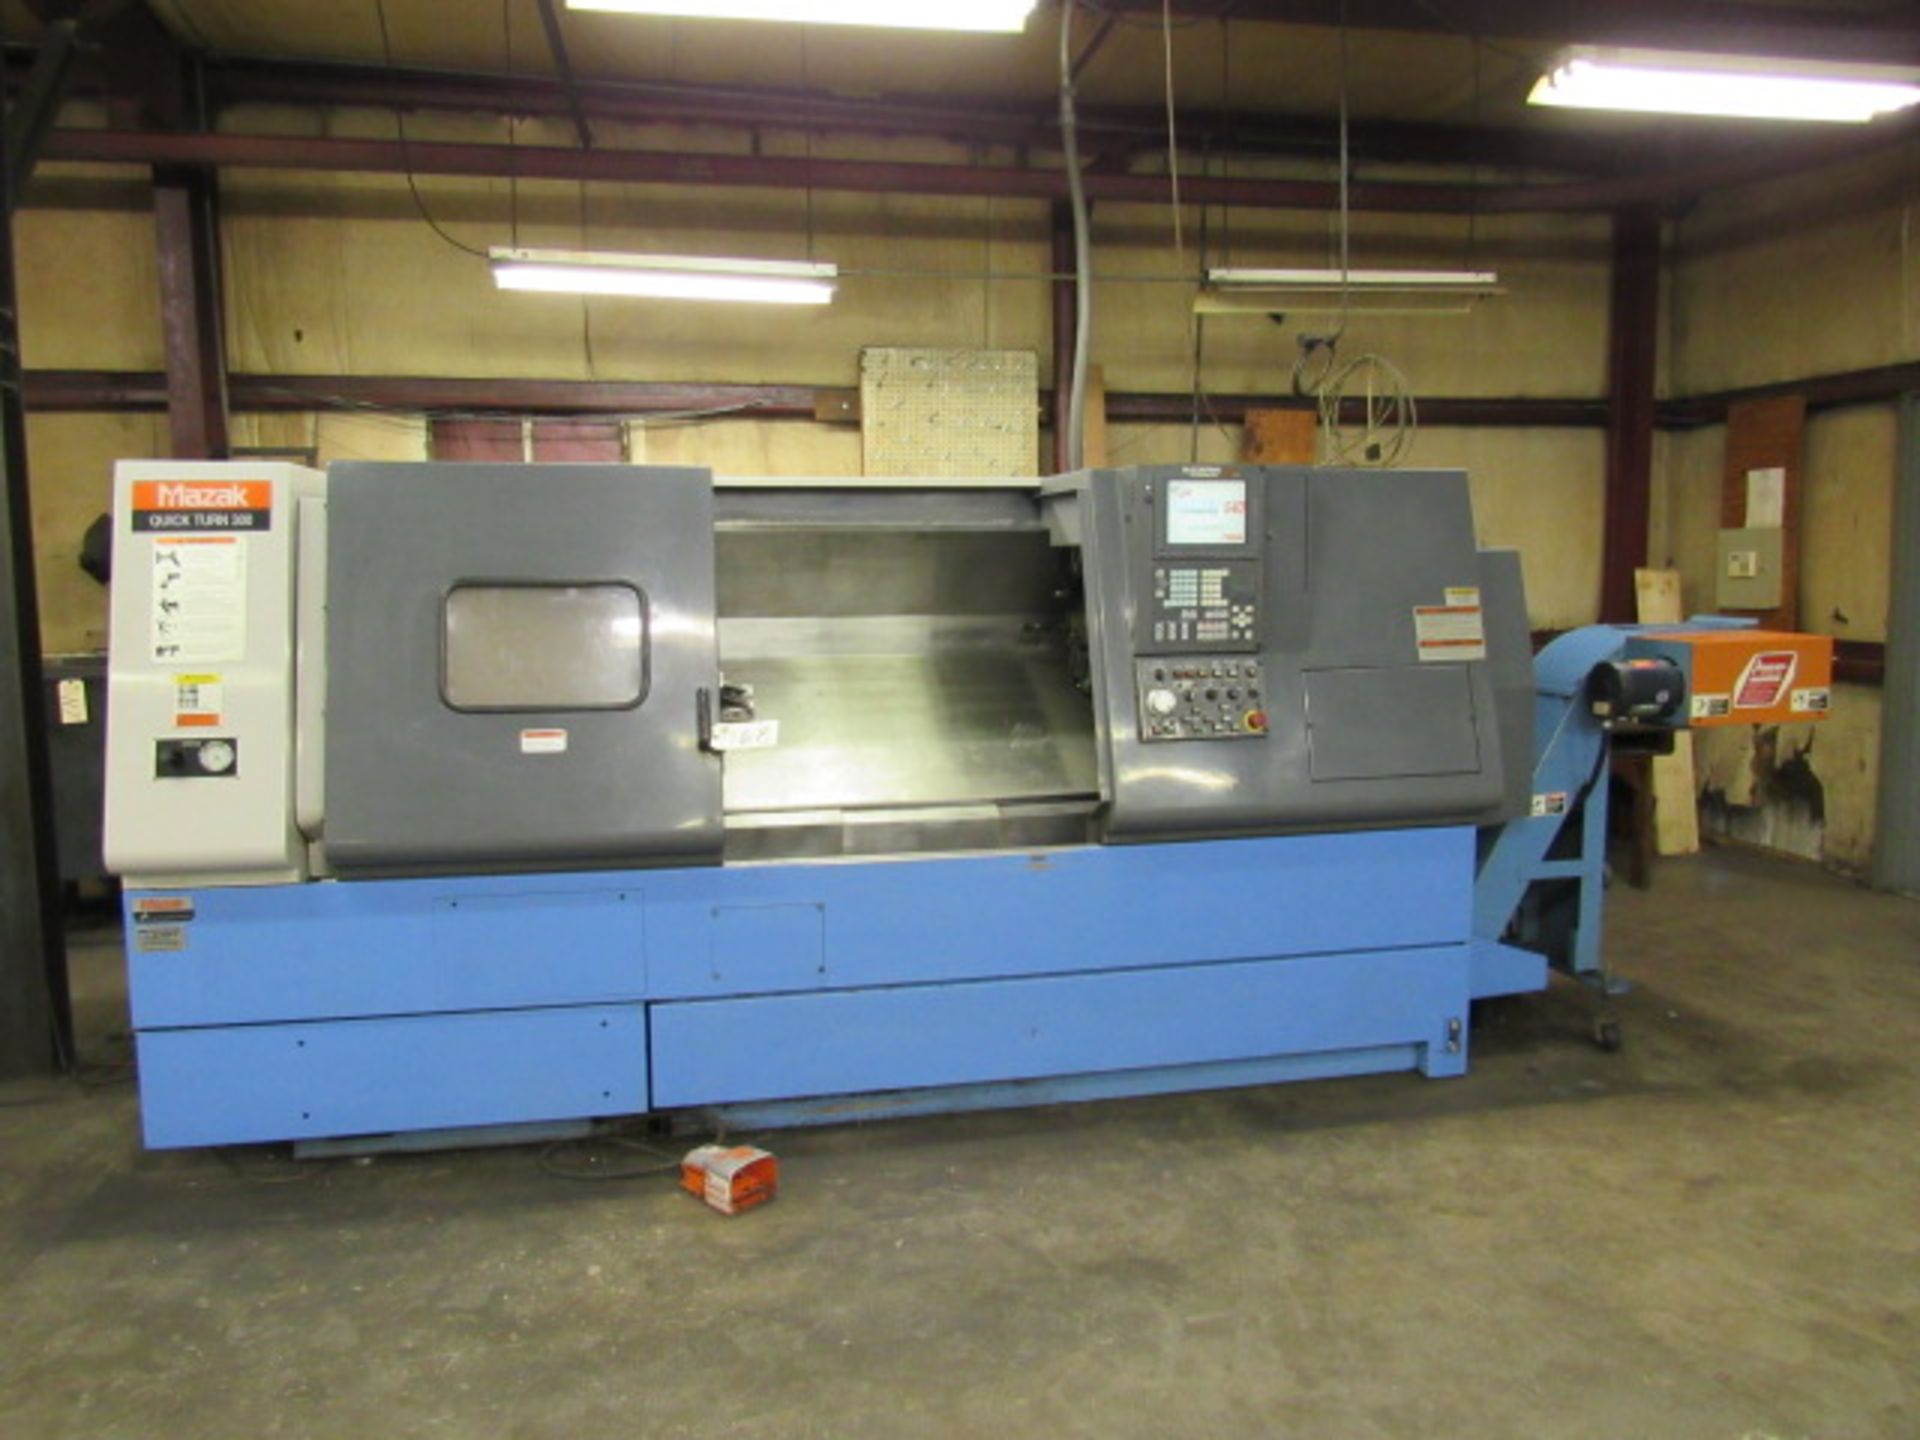 Mazak QT-300 CNC Turning Center with 10'' 3-Jaw Power Chuck, Approx 50'' to Tailstock, 16 Position